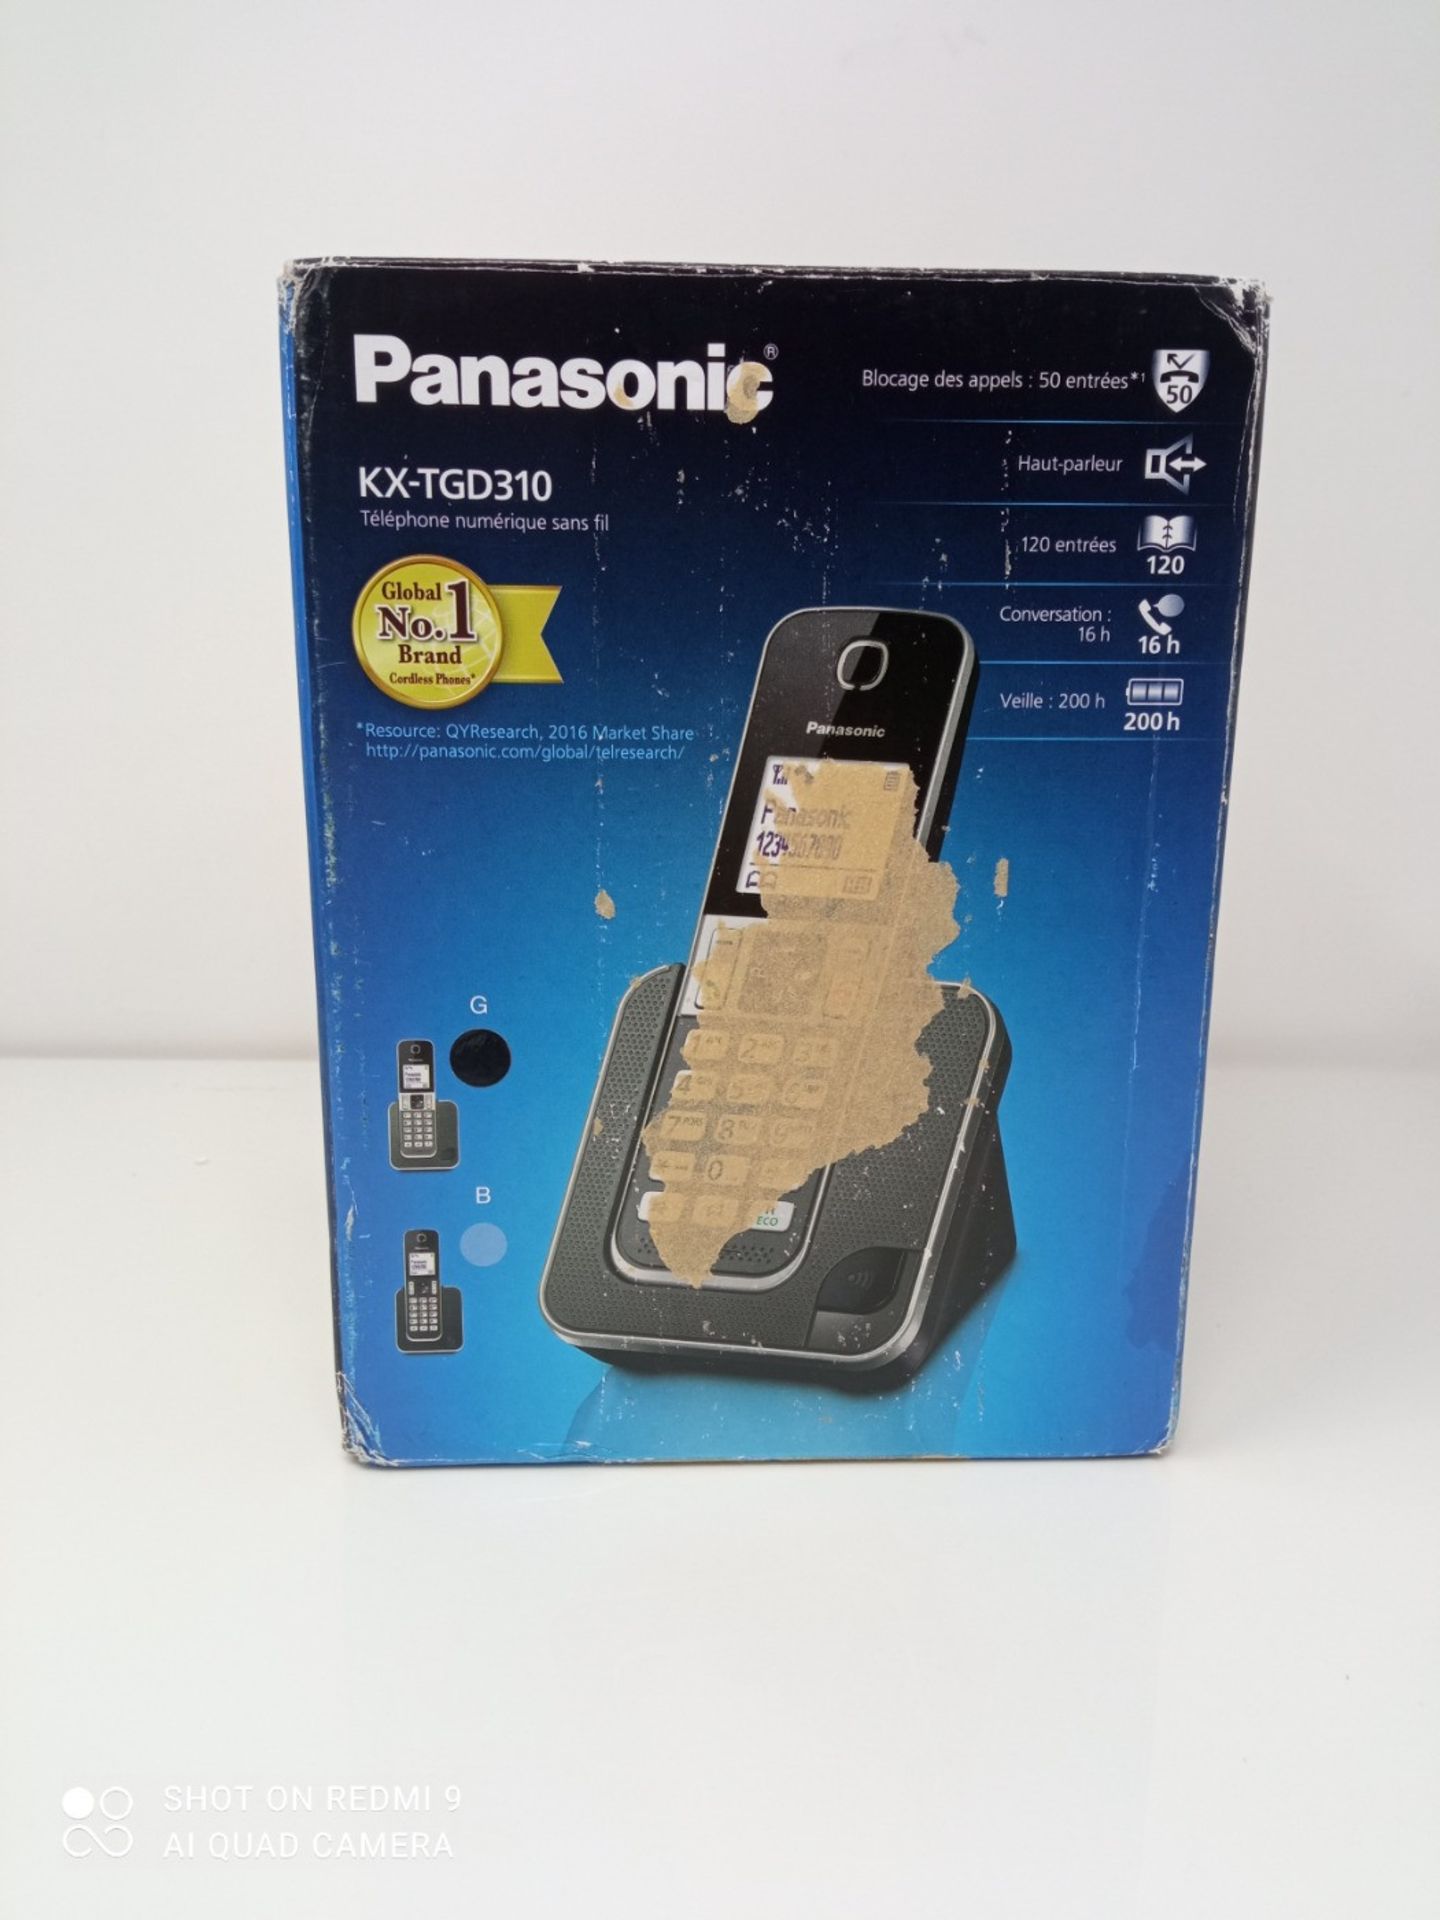 Panasonic KX-TGD310 DECT Caller ID Black, White Telephone - Telephones (DECT, Table/Be - Image 2 of 3